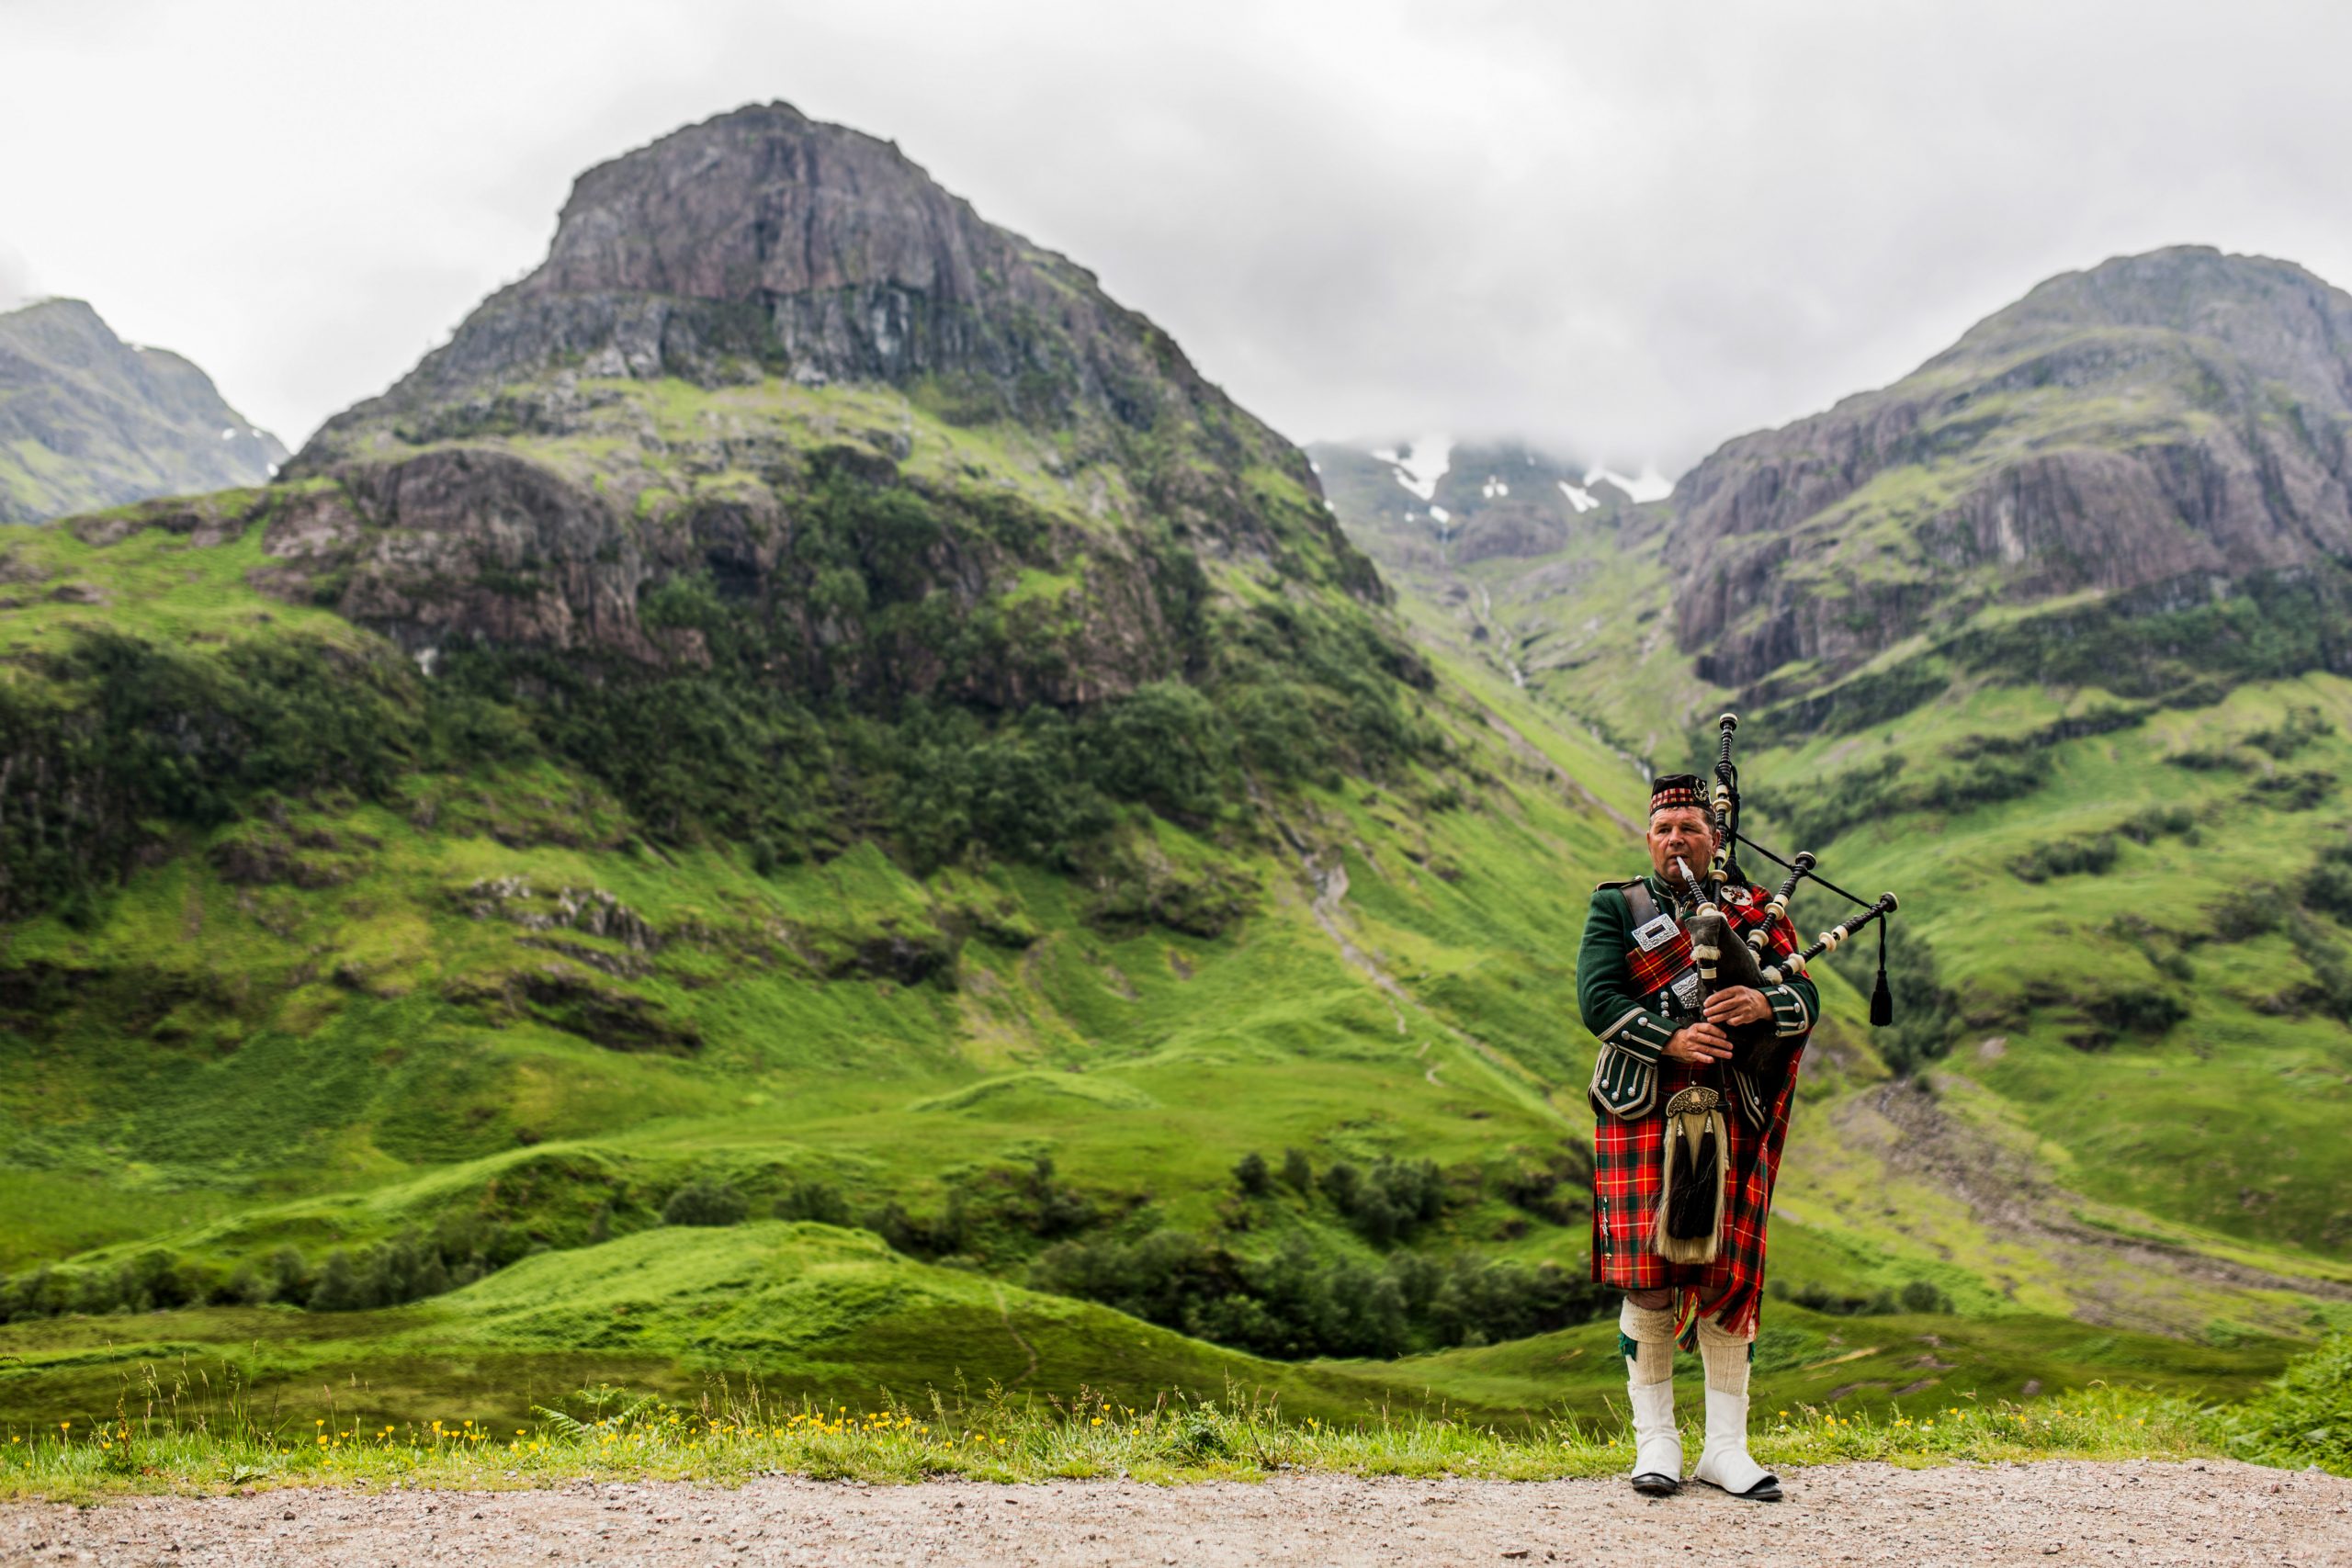 Scottish bagpiper in front of a mountain